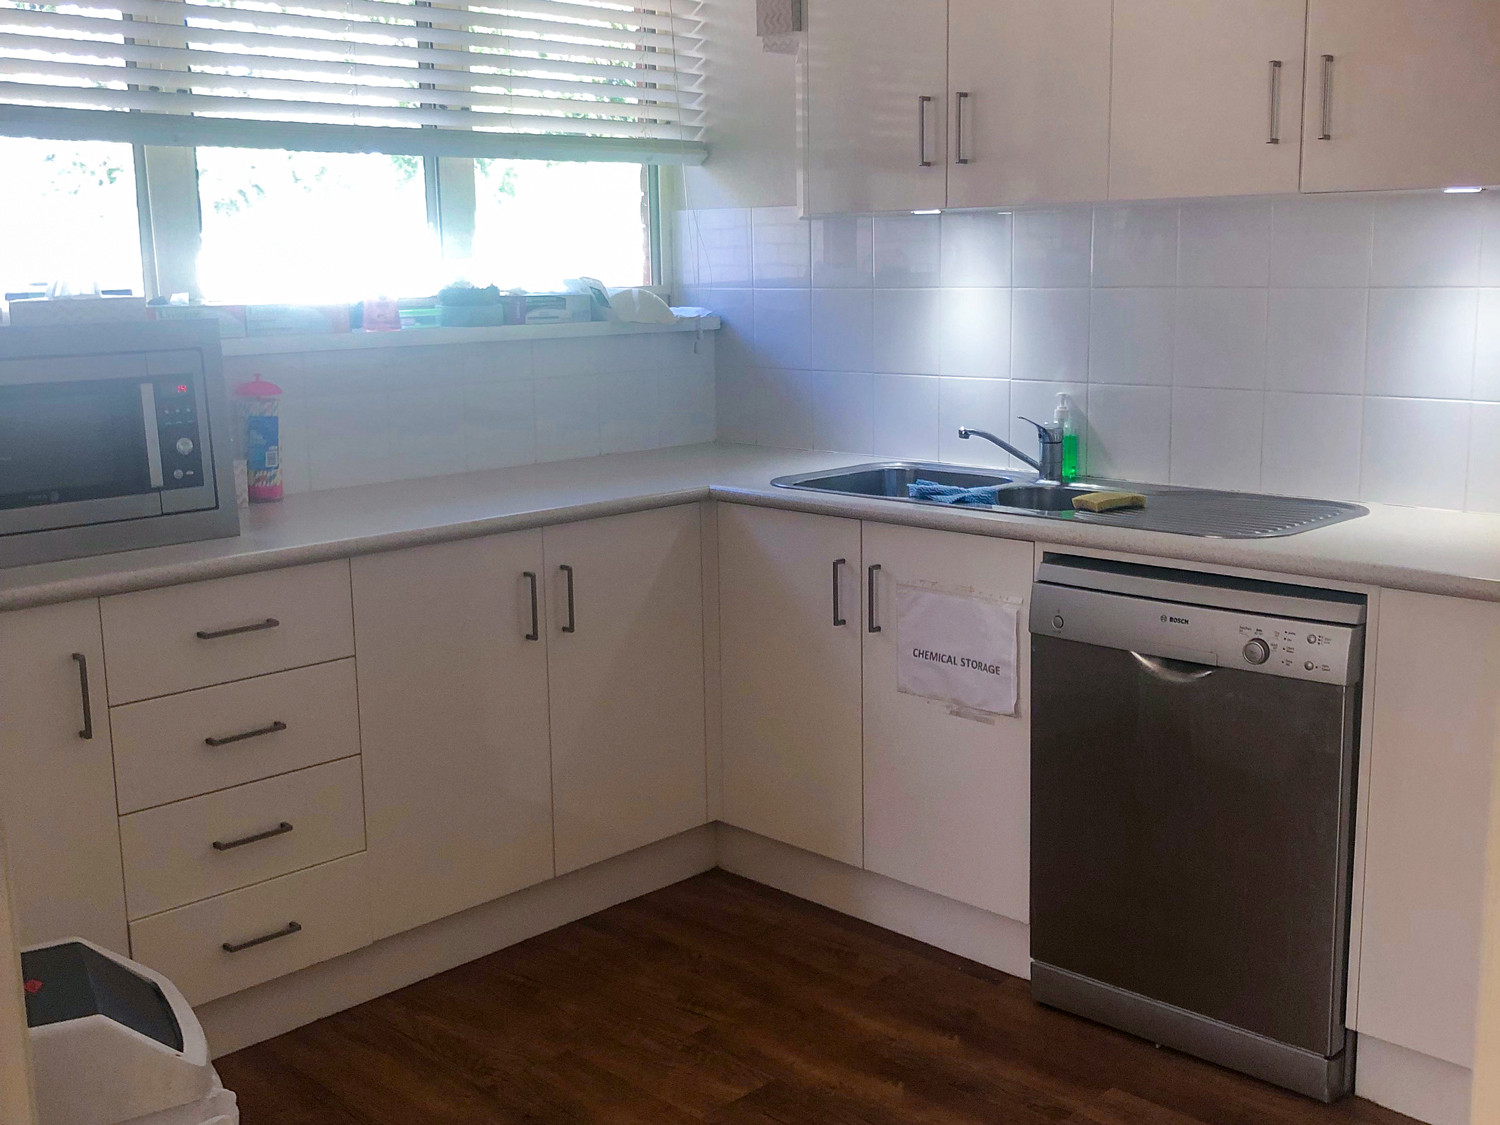 Kitchen with off-white cabinetry, white tiled splash backs and timber look flooring, A large dishwasher, sink and microwave in stainless steel are visibile